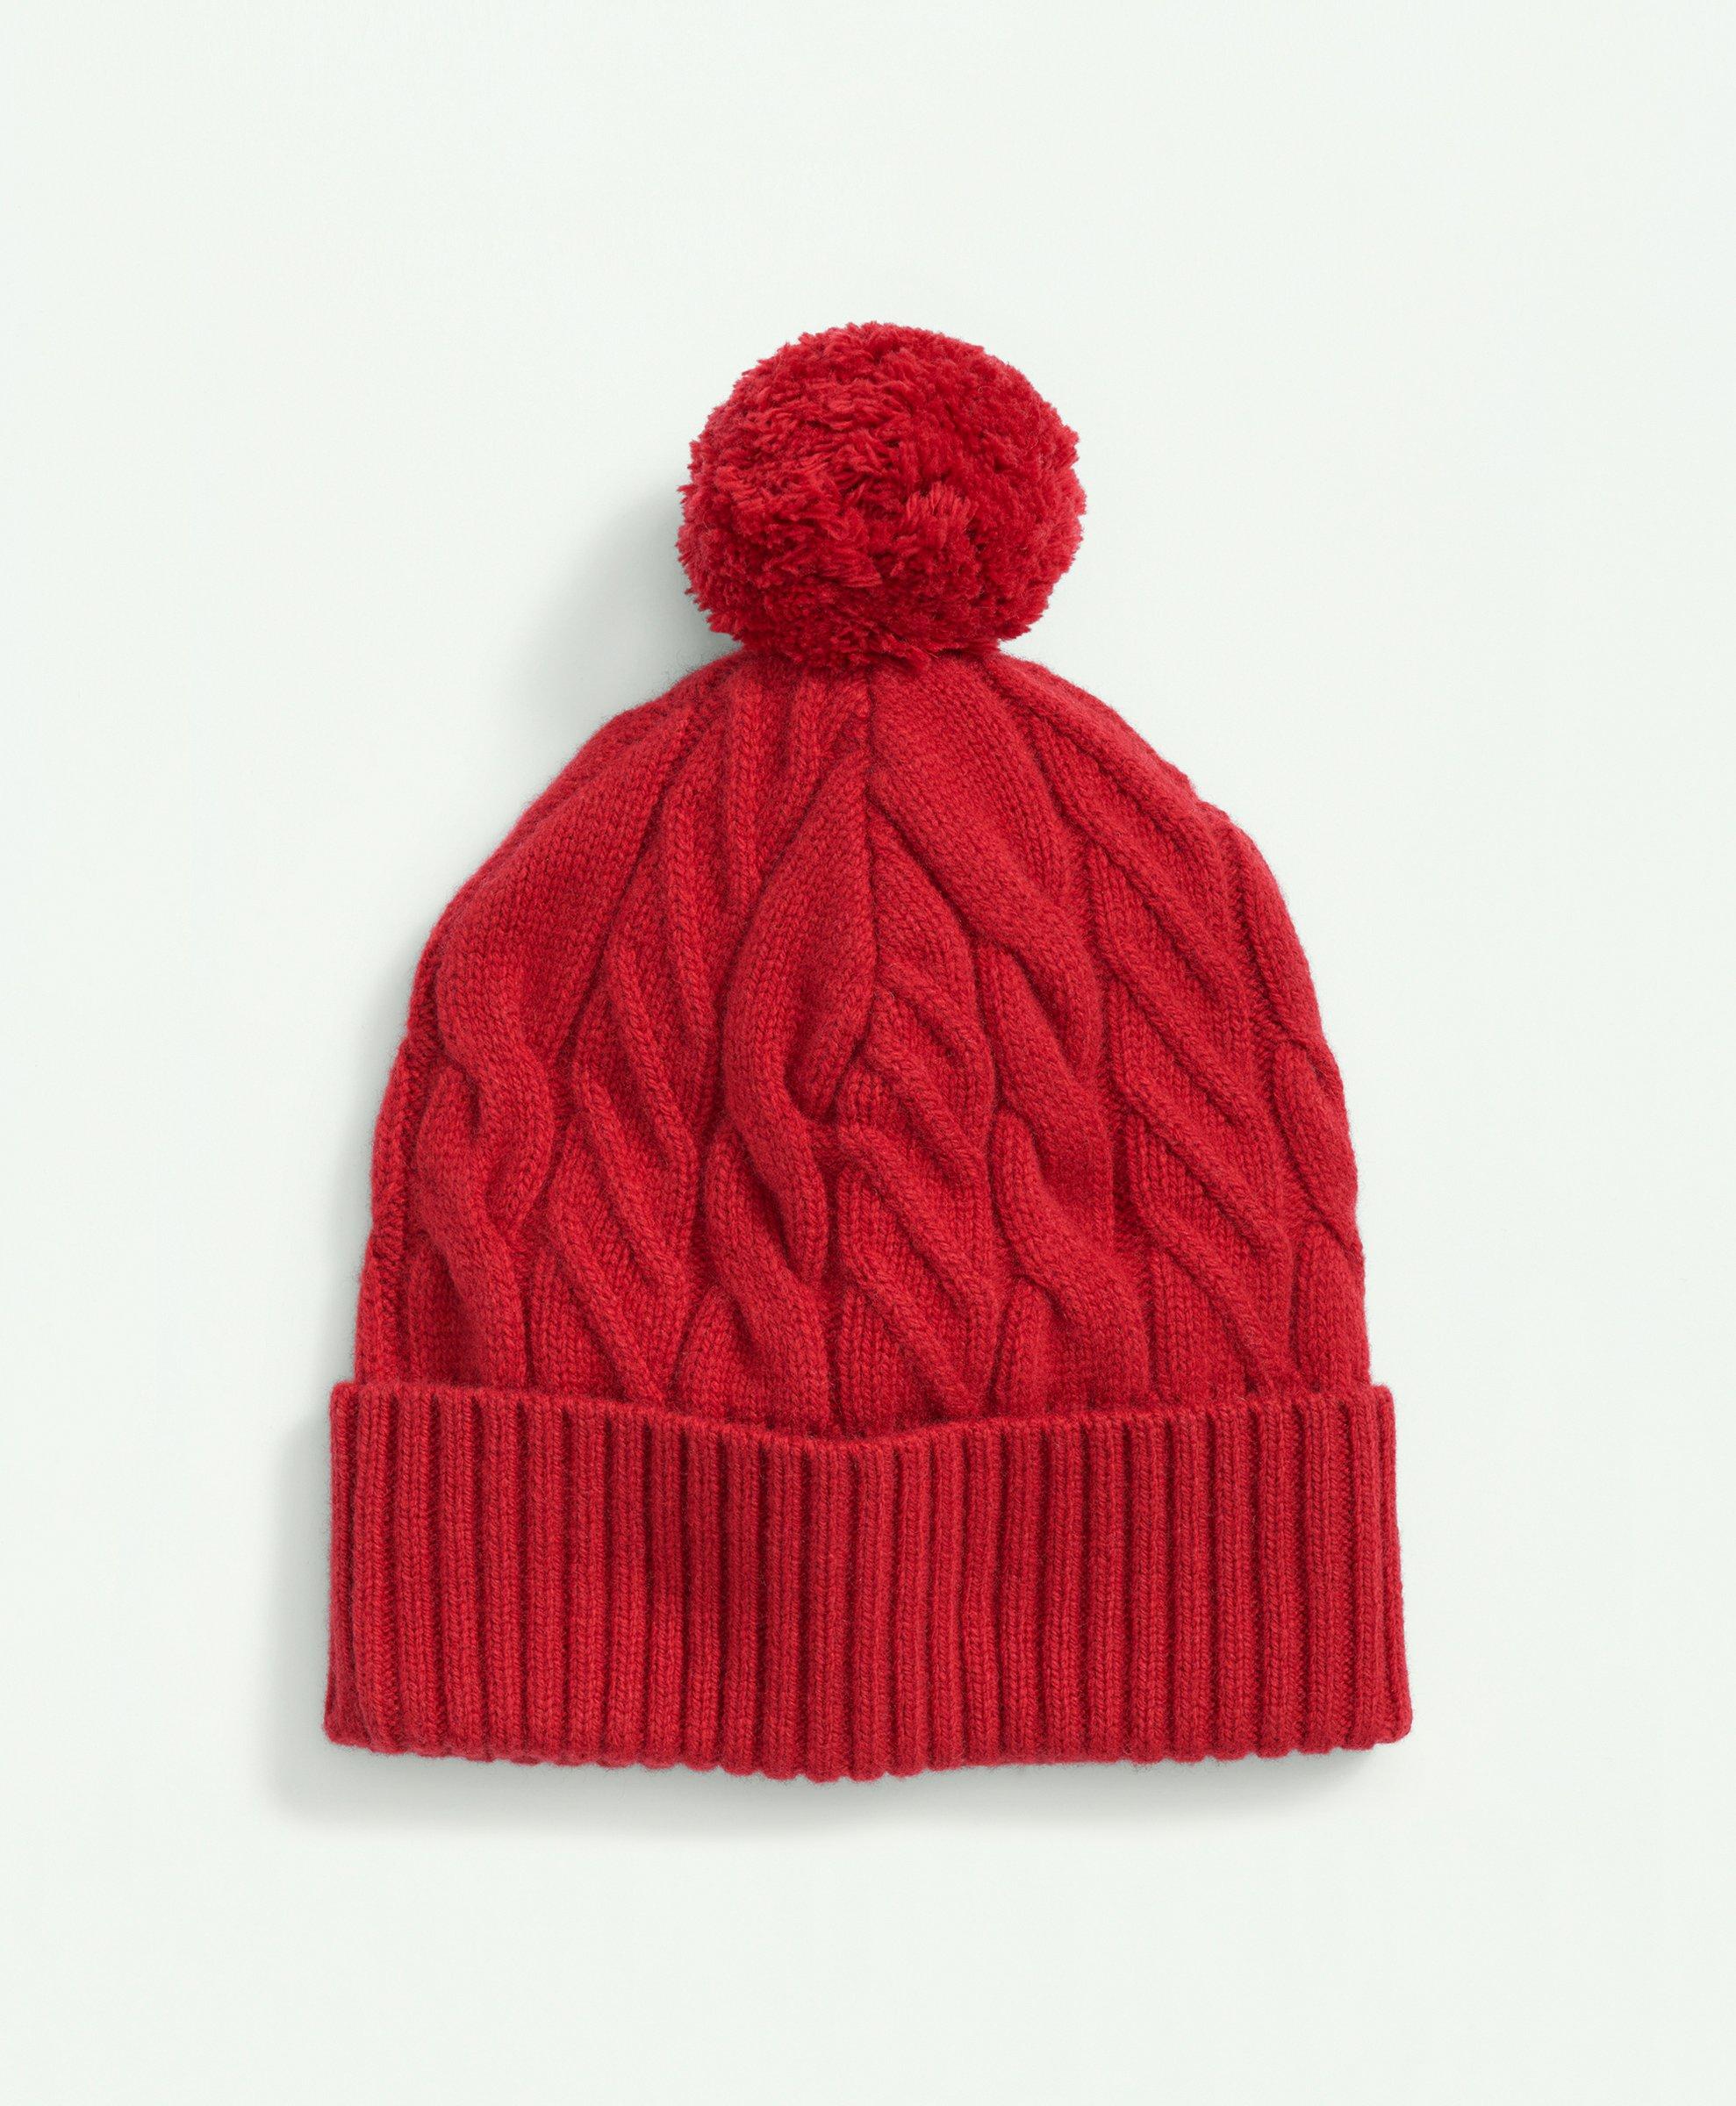 Merino Wool and Cashmere Blend Cable Knit Pom Beanie, image 1